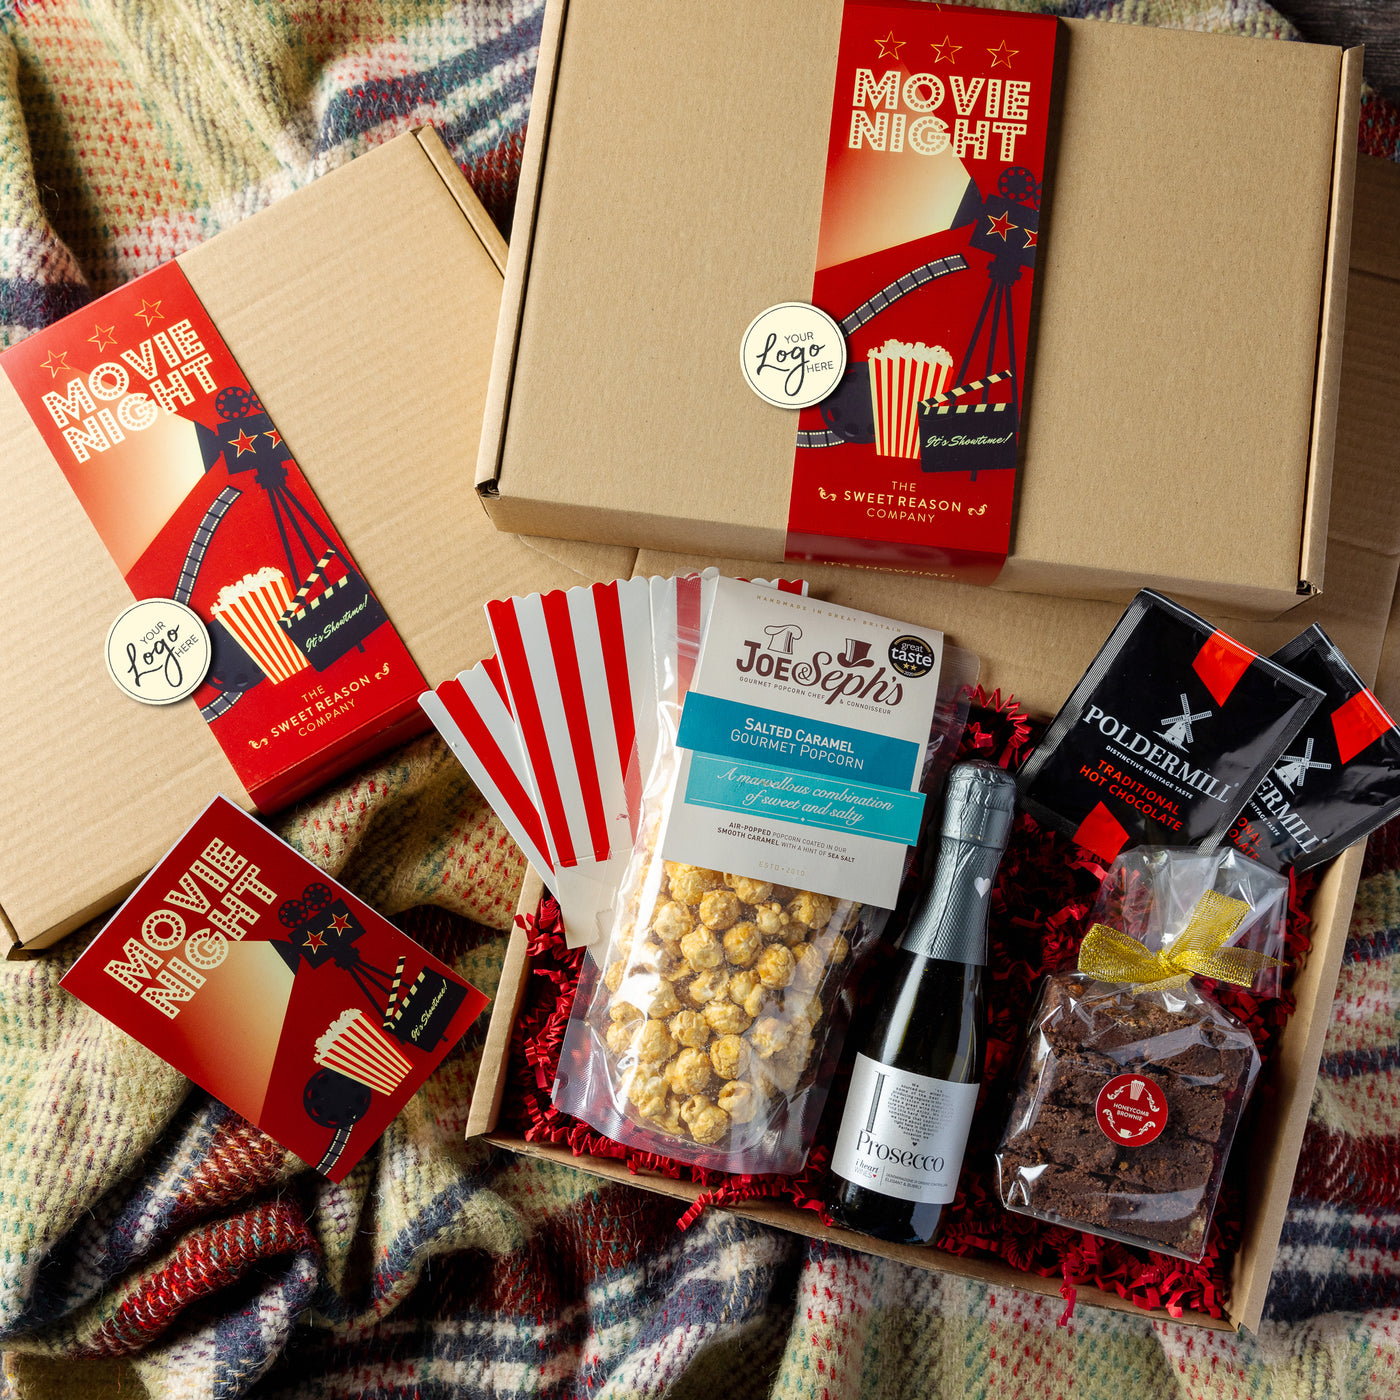 Branded & personalised 'Movie Night' Treats & Prosecco